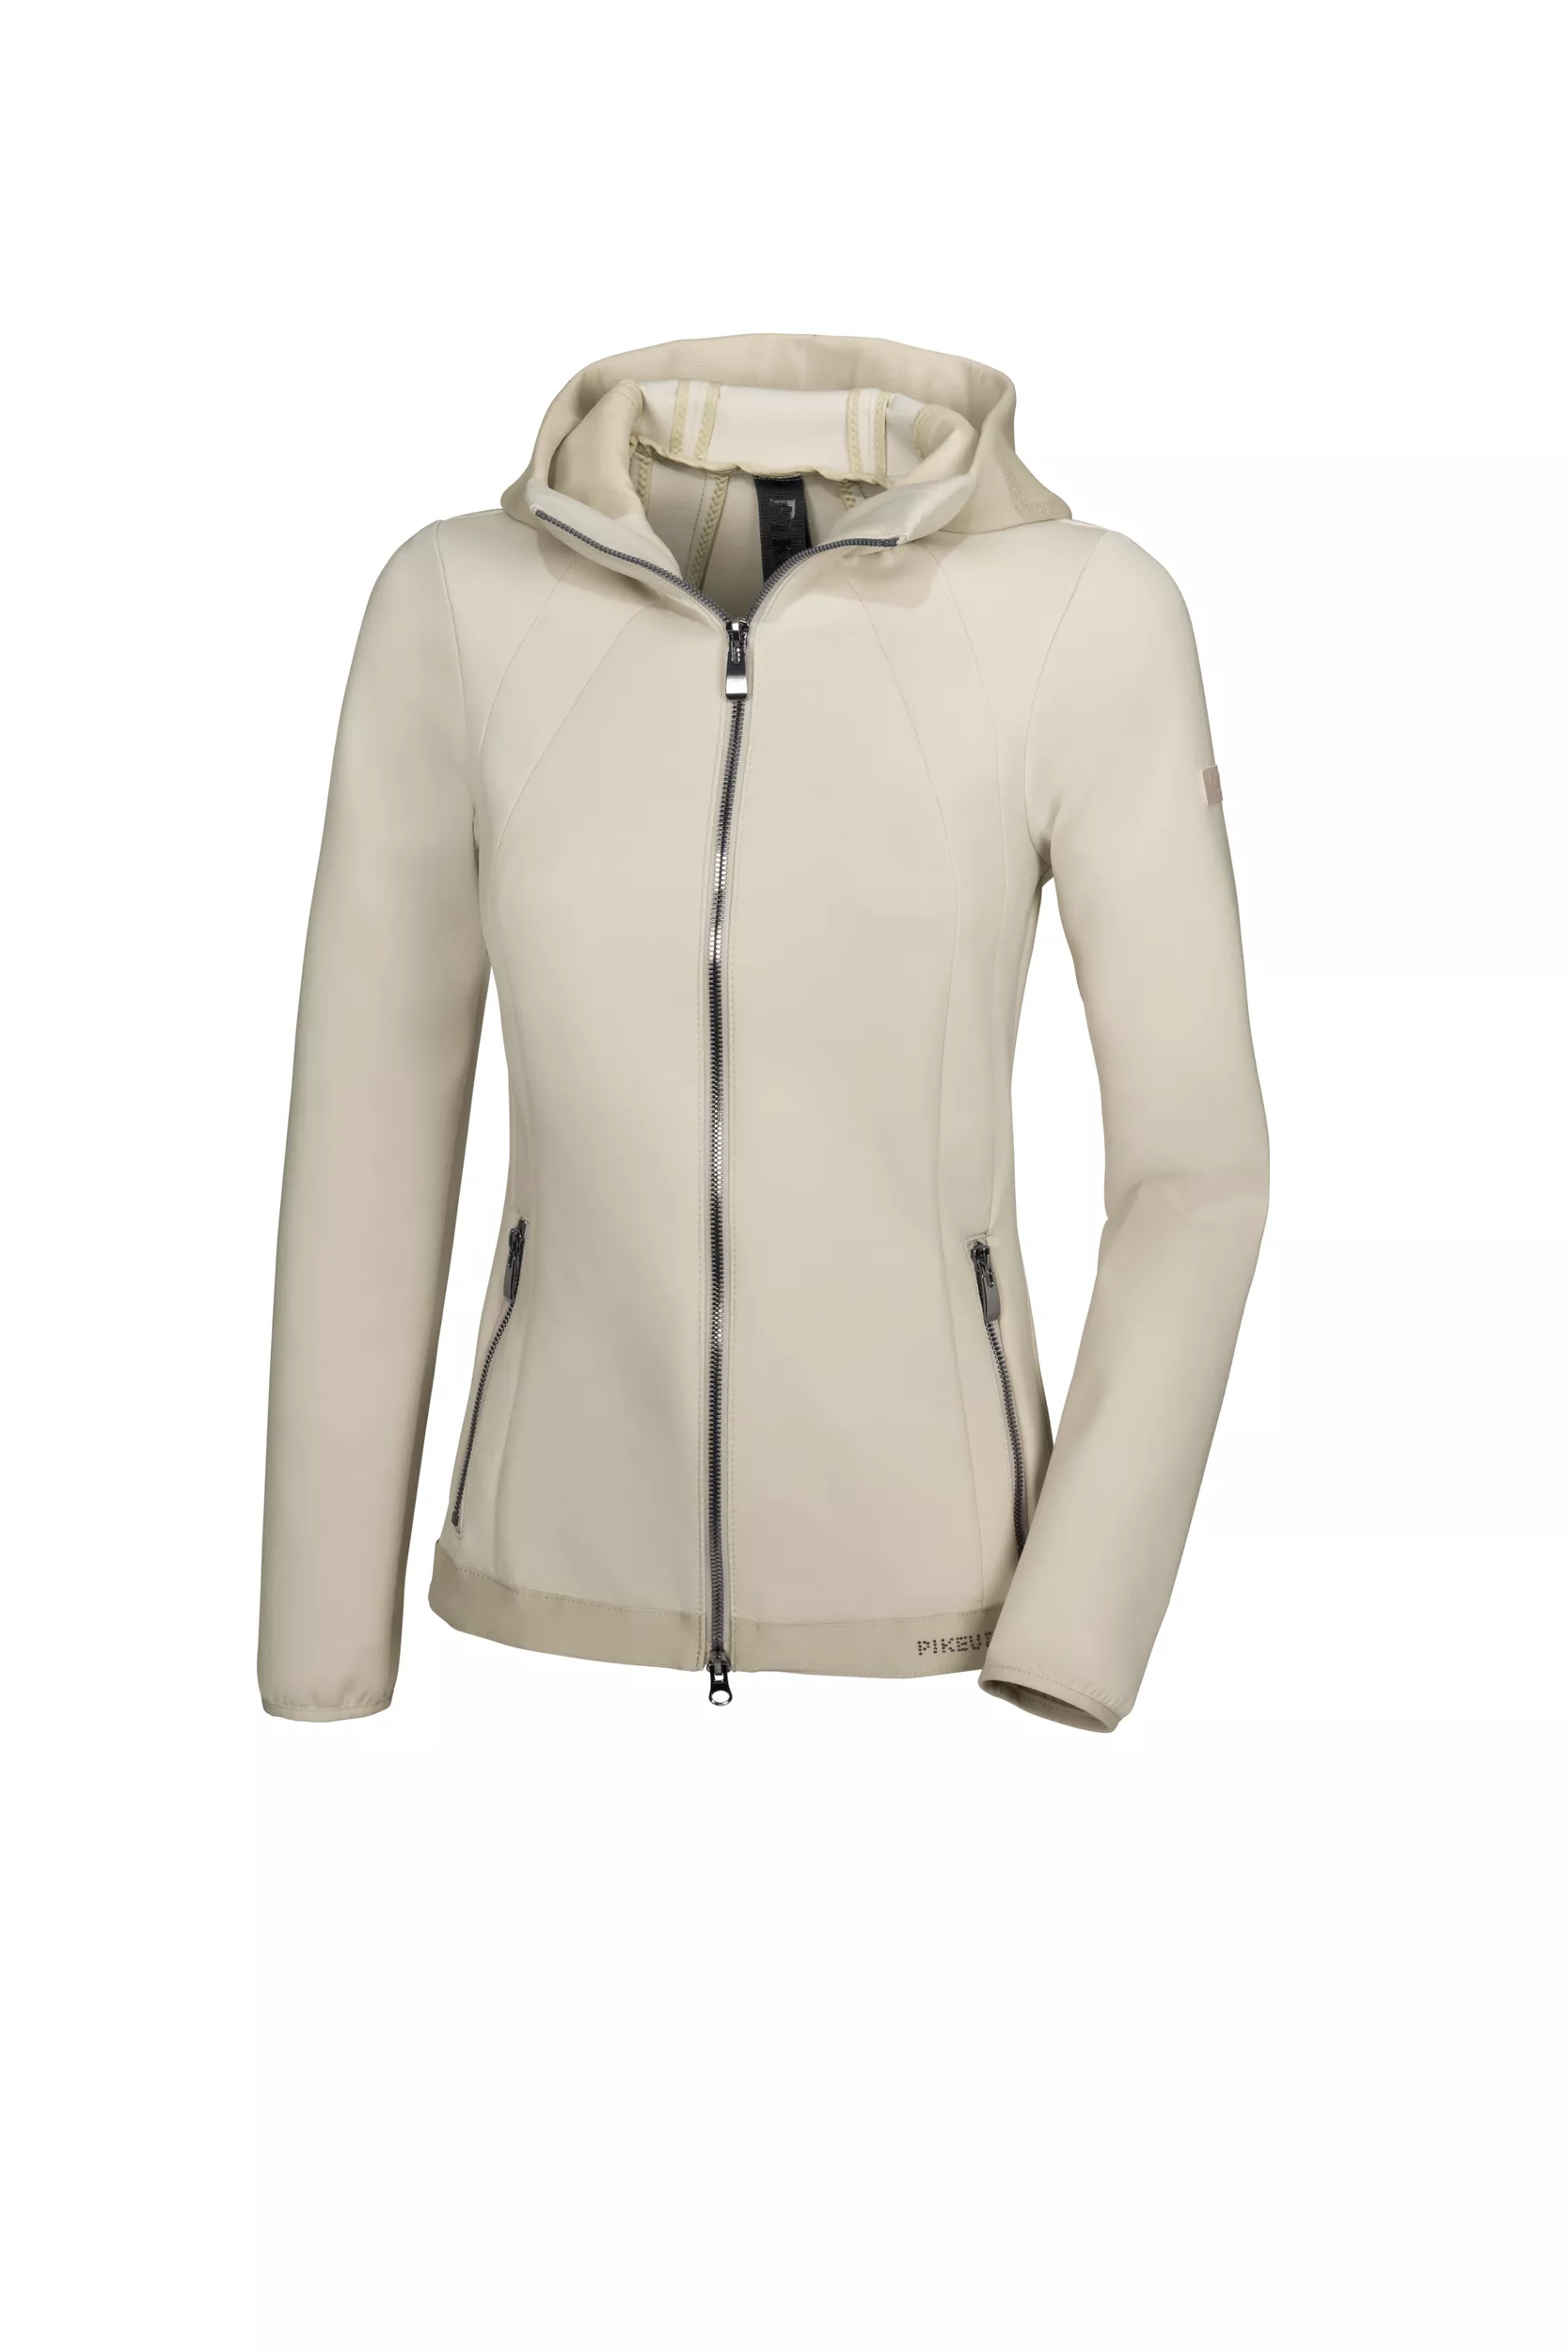 Philine Funktionsjacke Selection FS 22, ivory